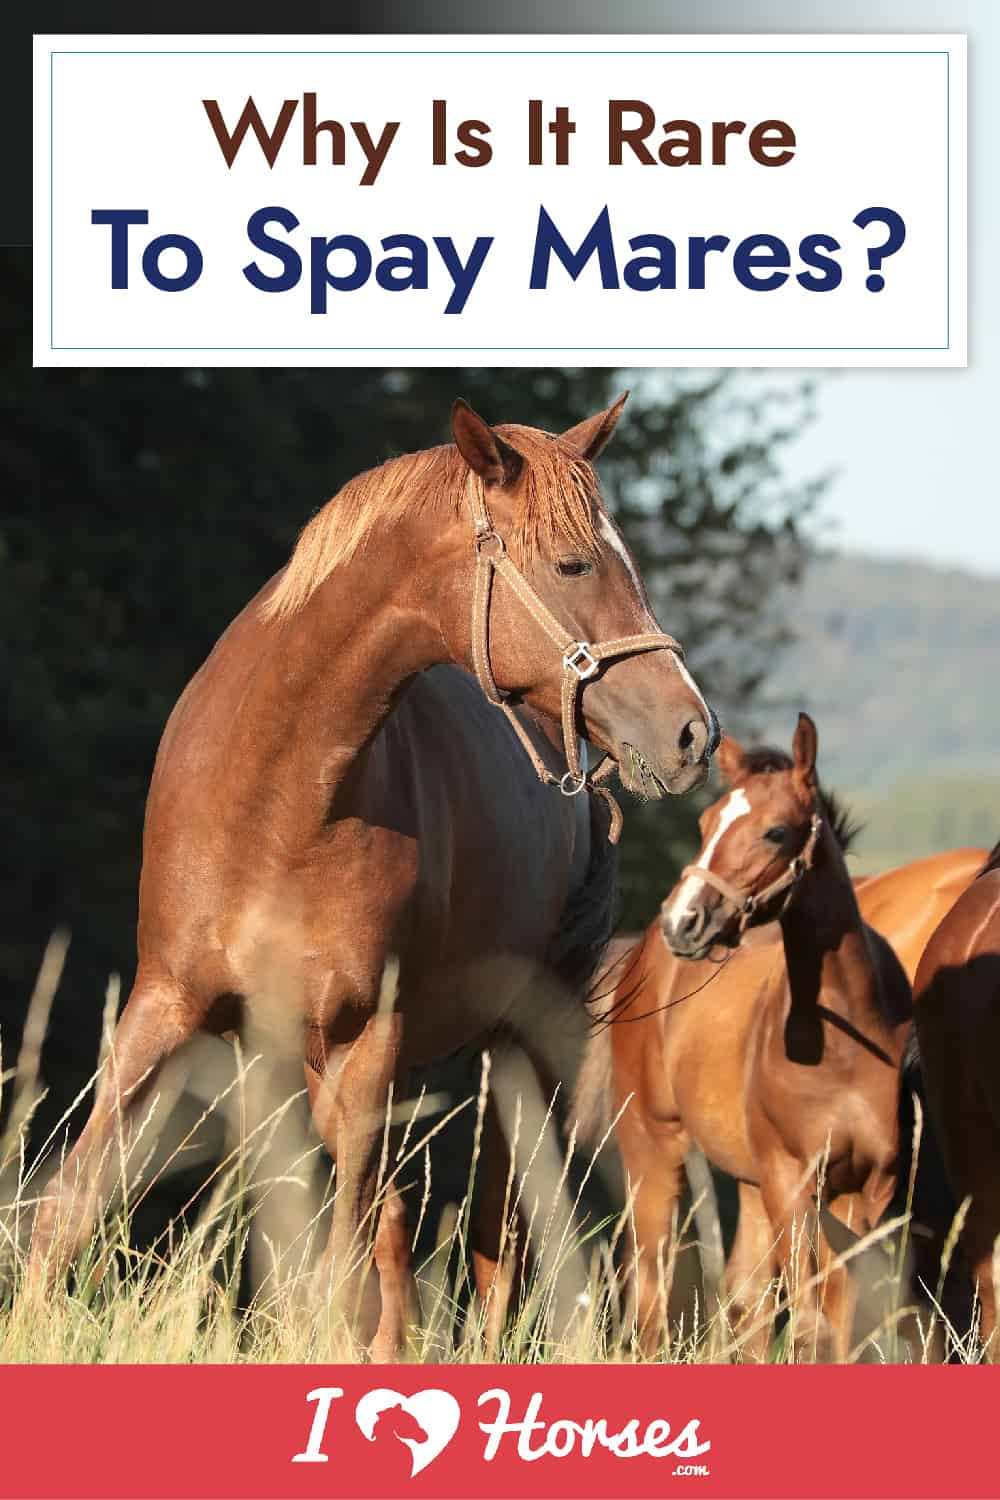 Why Is It Rare To Spay Mares